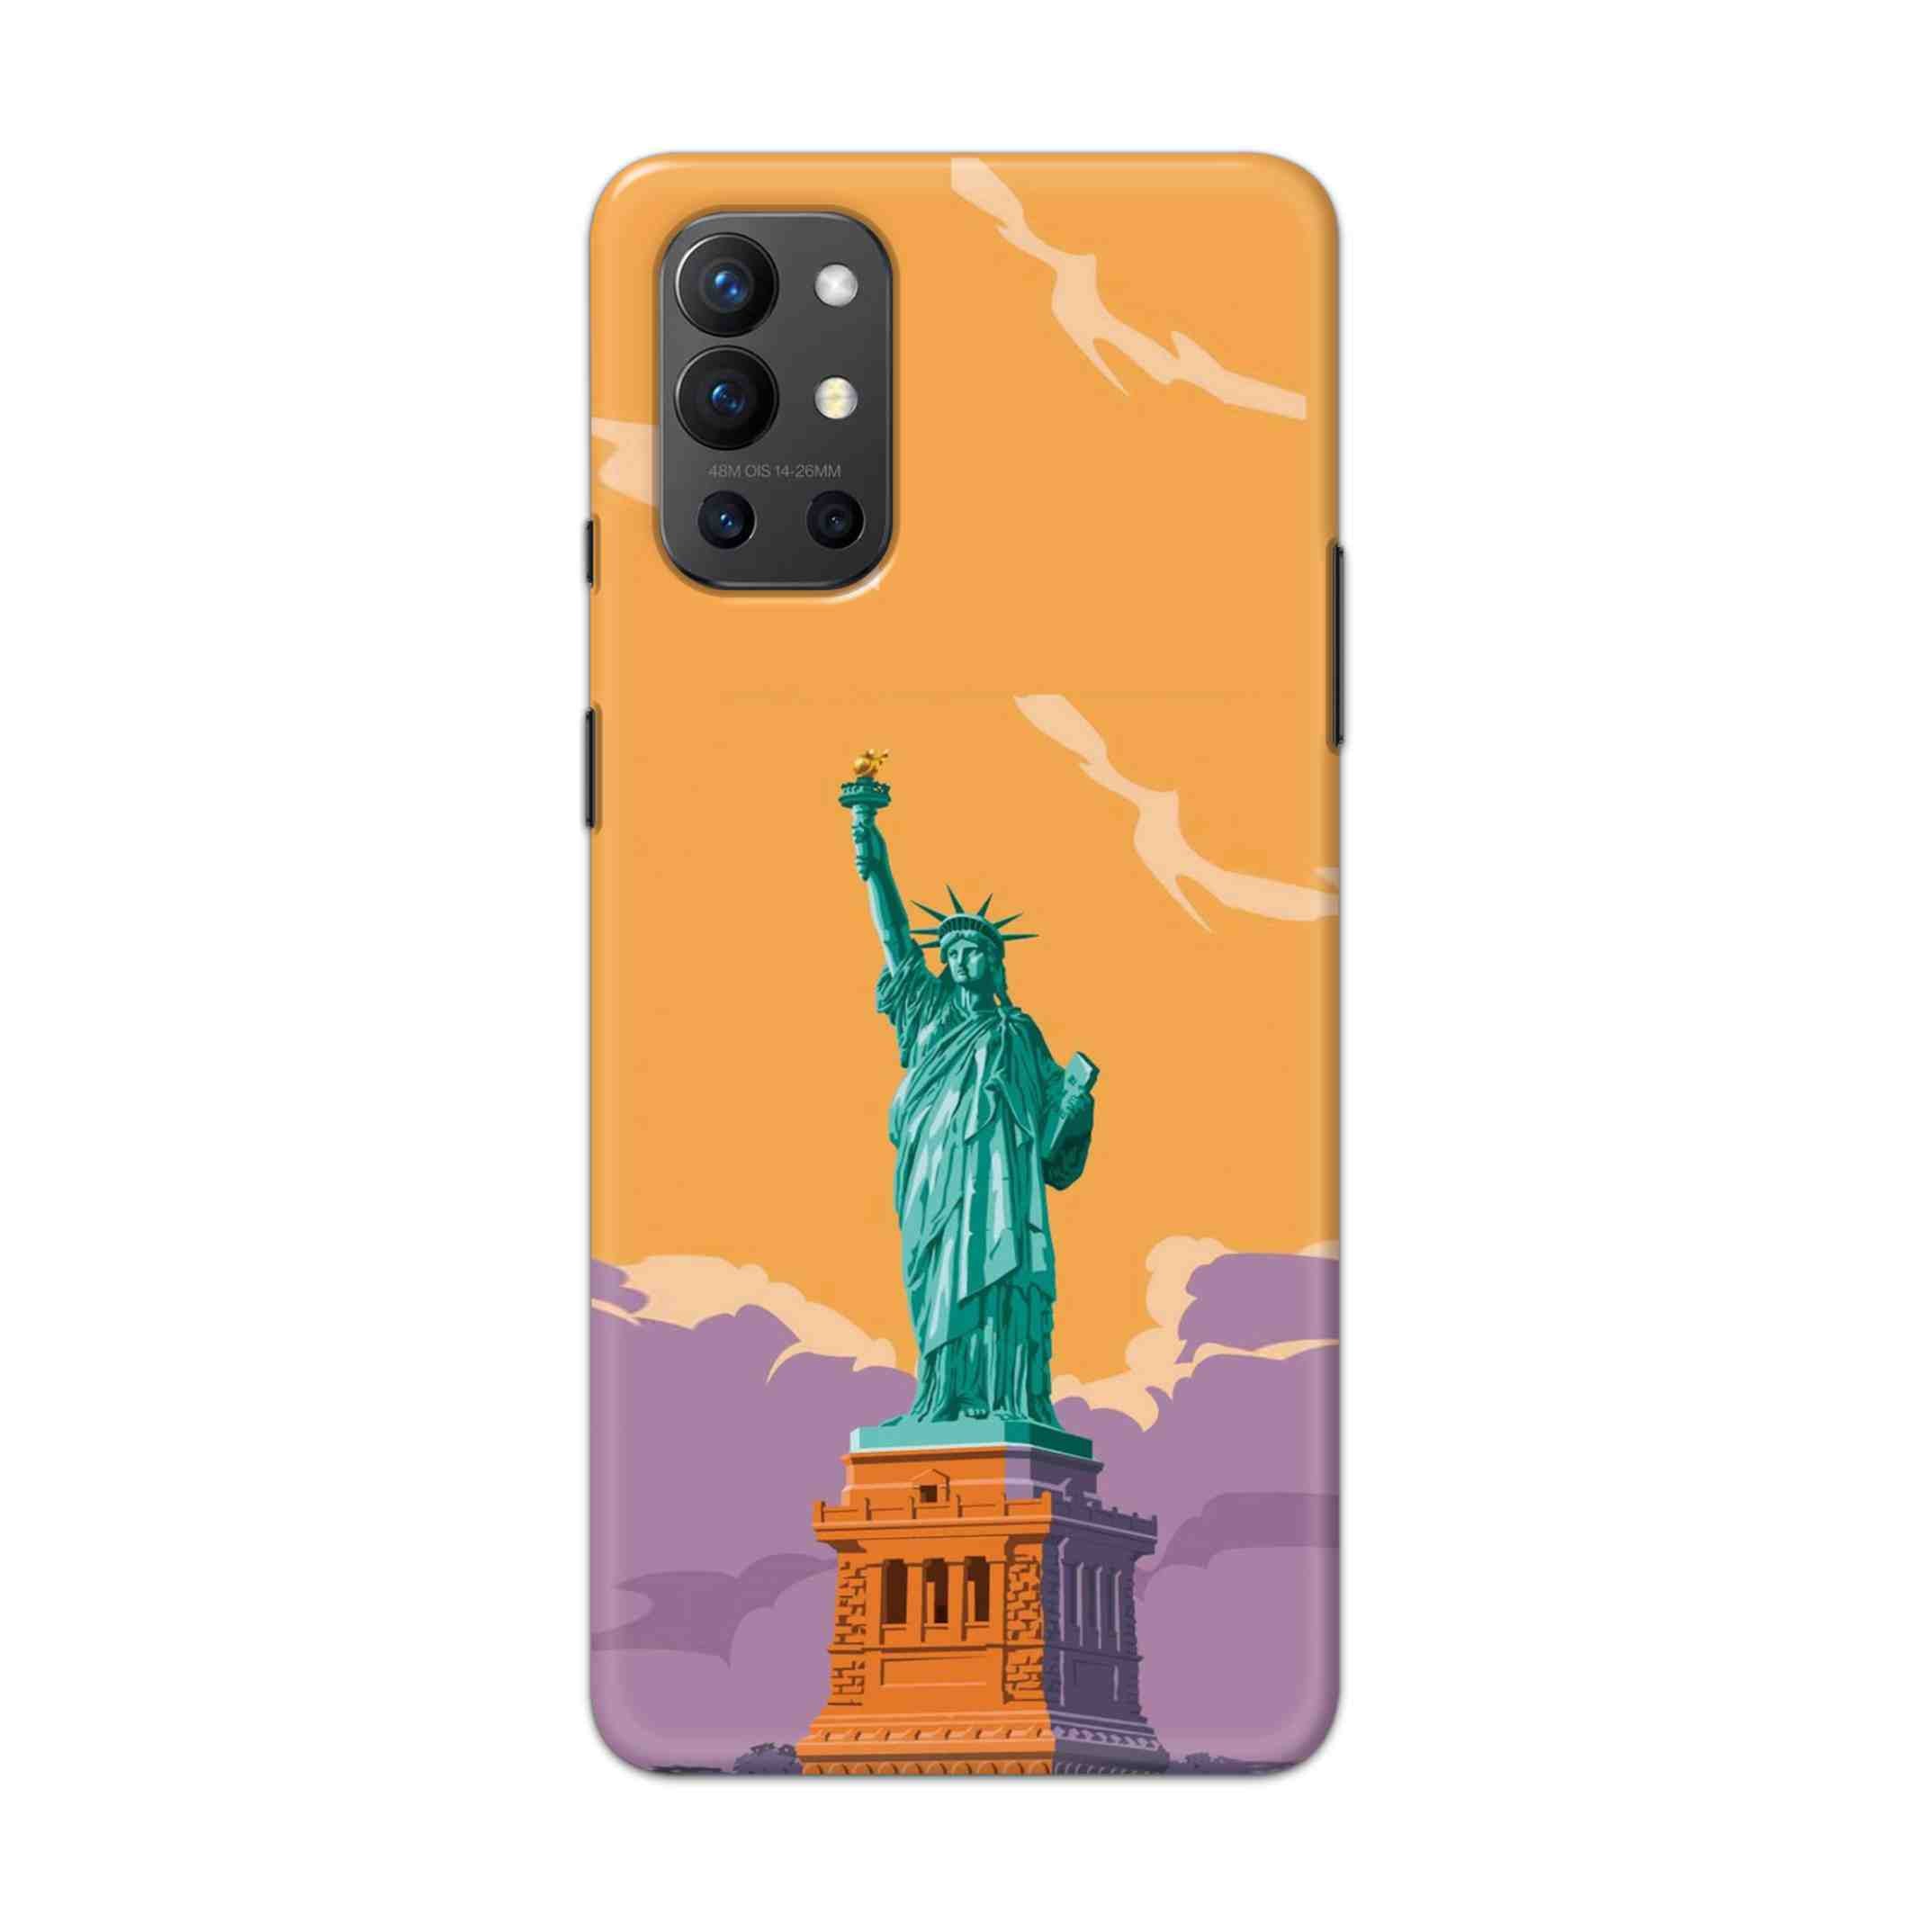 Buy Statue Of Liberty Hard Back Mobile Phone Case Cover For OnePlus 9R / 8T Online